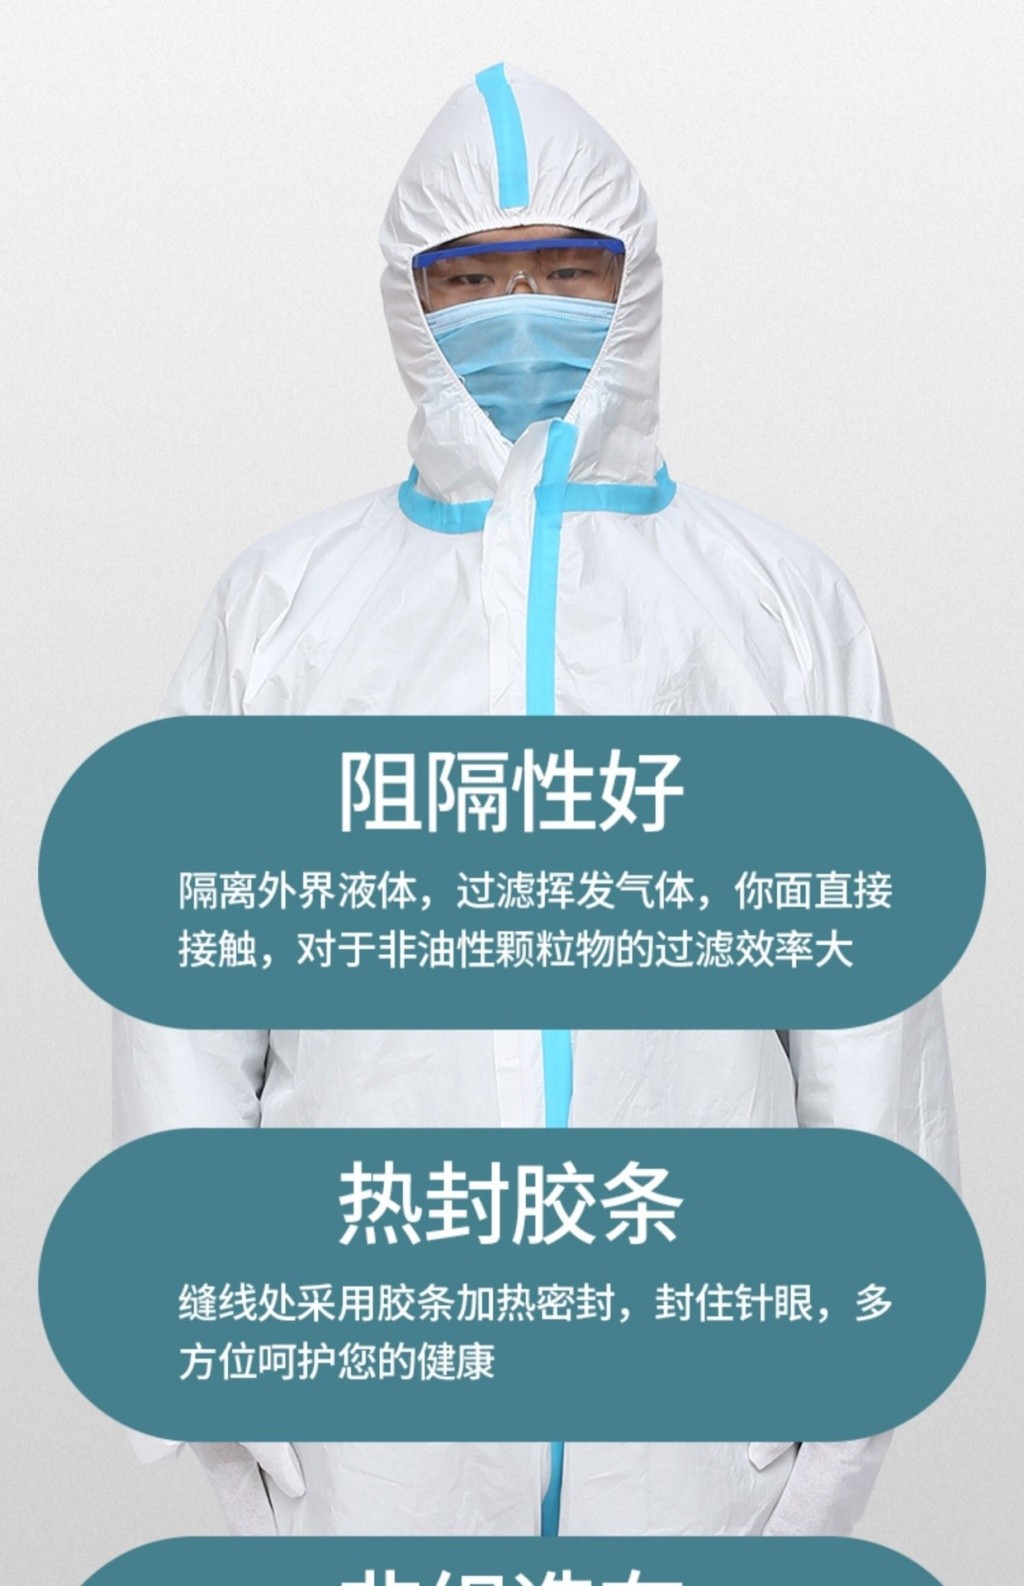 DISPOSABLE PROTECTIVE CLOTHING